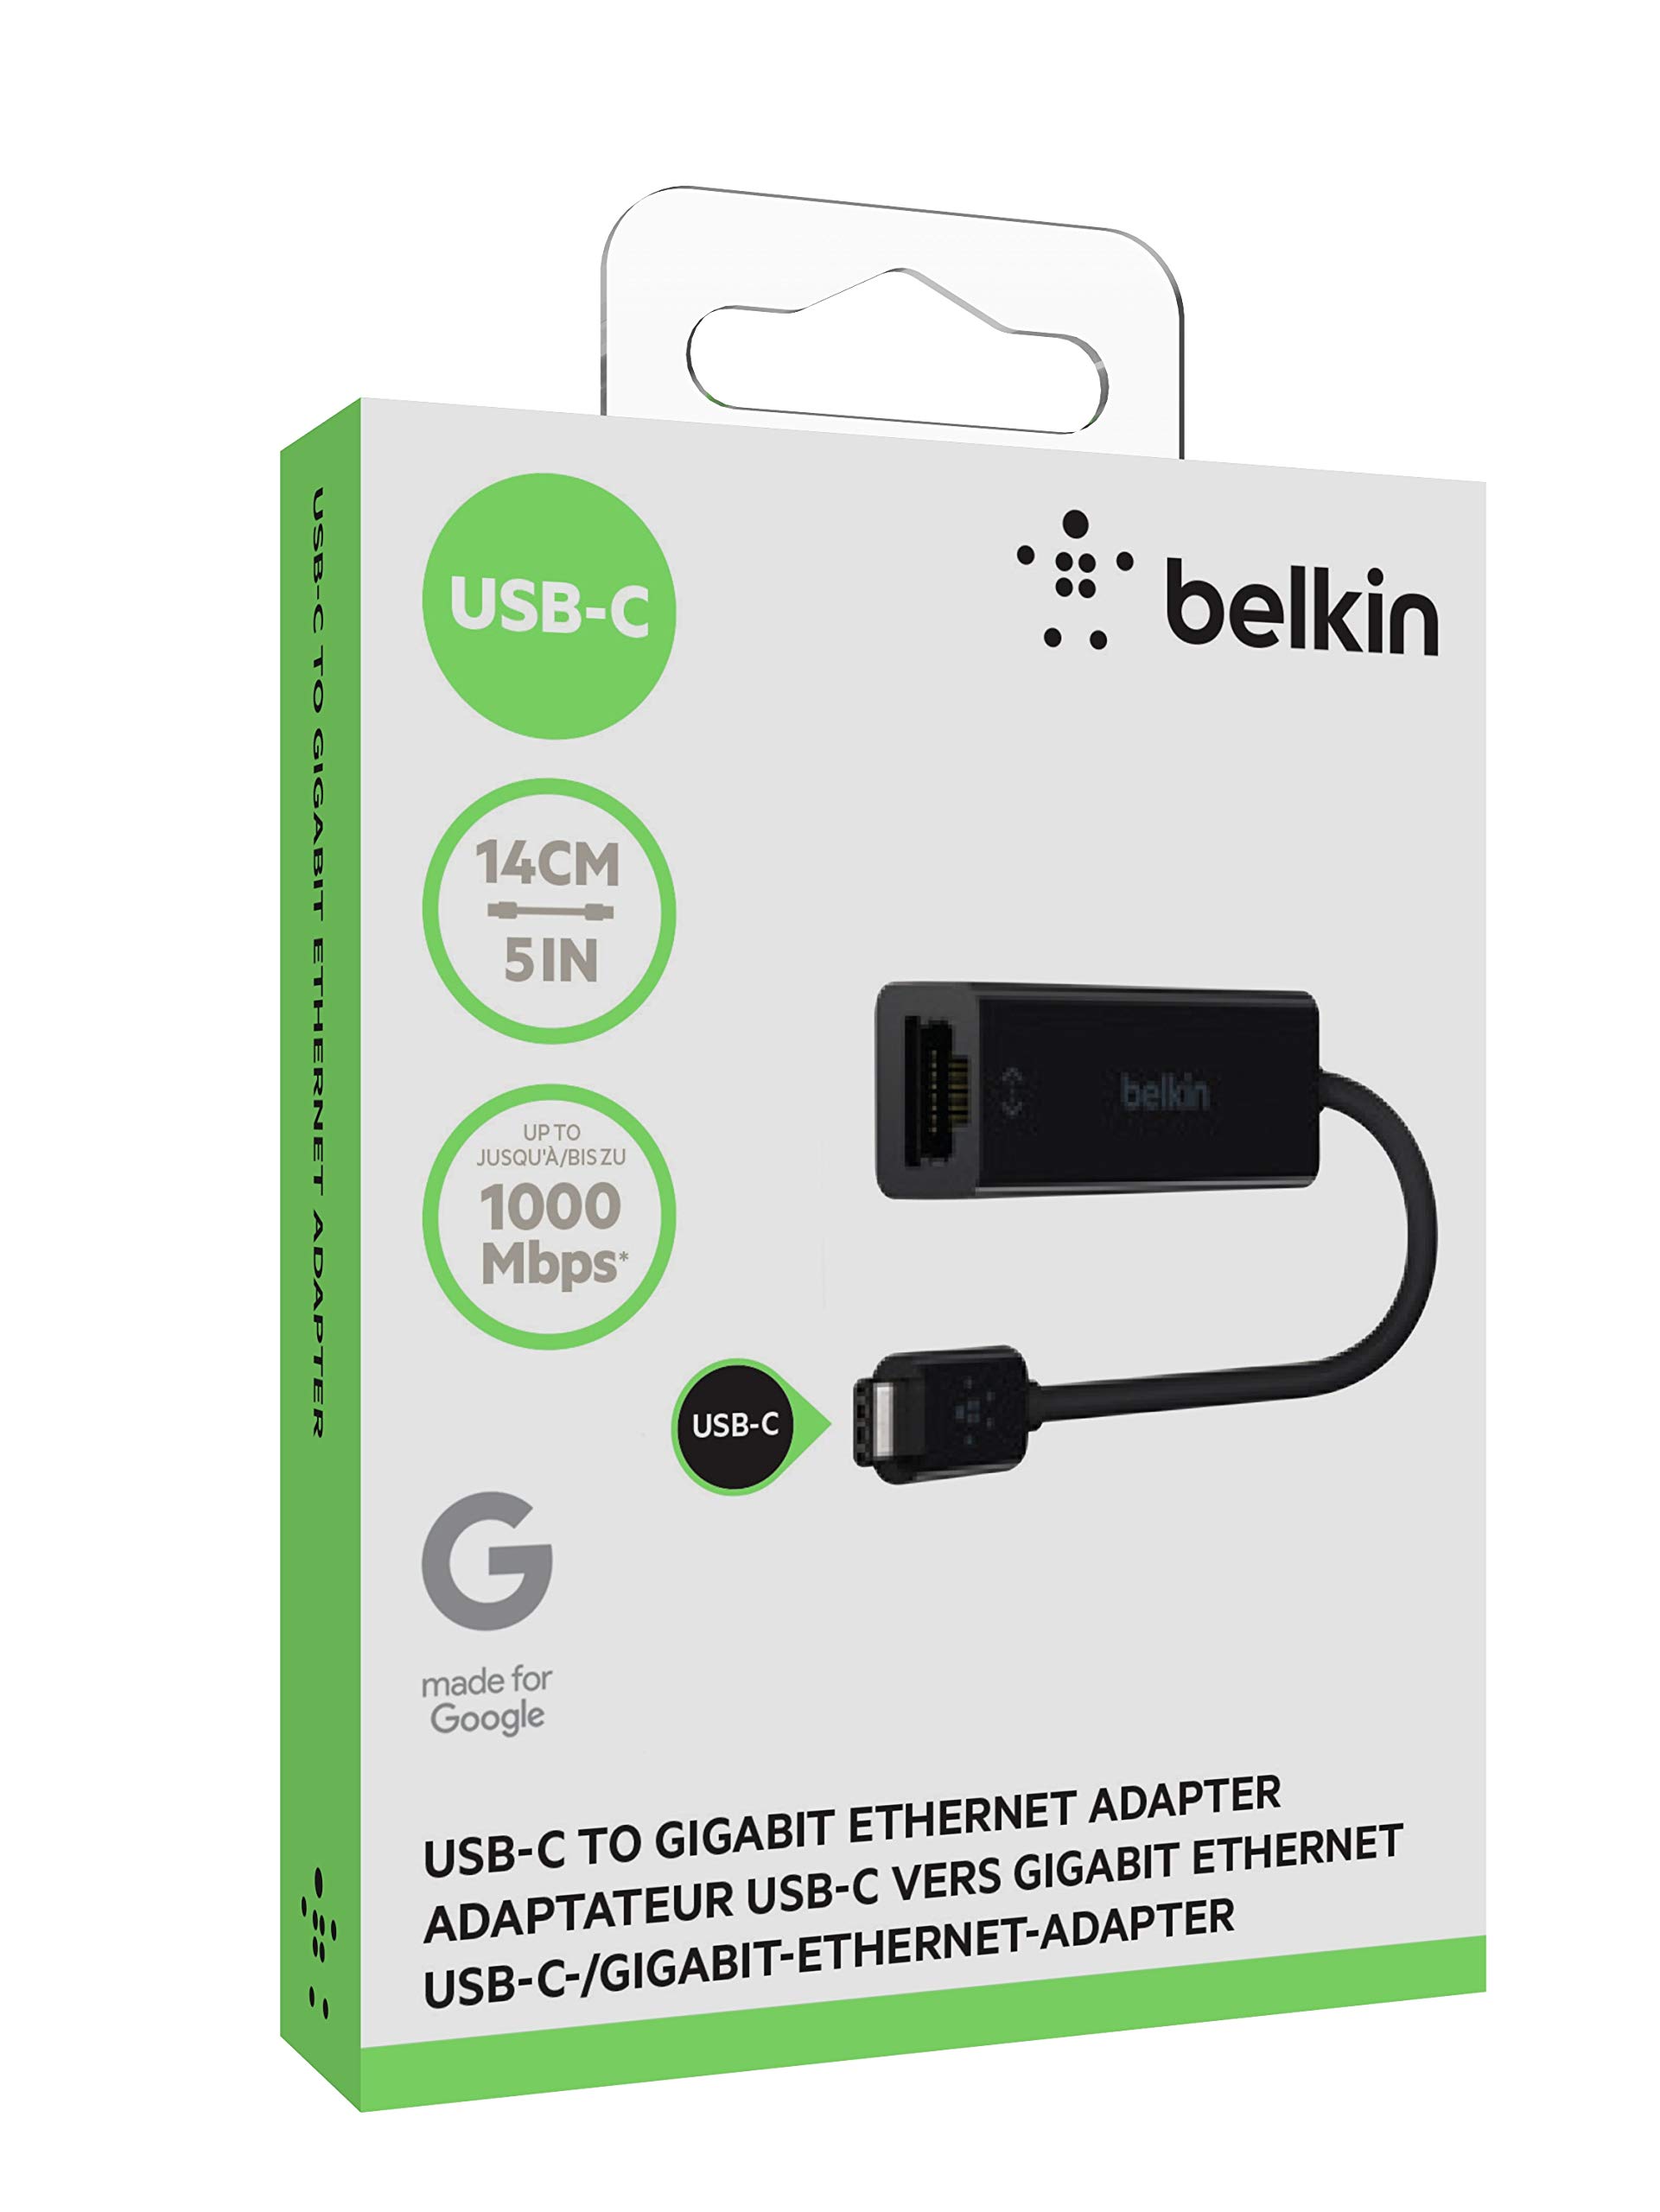 Belkin USB C To Ethernet Adapter - Gigabit Ethernet Port Compatible with USB C Devices - USB C to Ethernet Cable For MacBook Pro & Dell XPS 13” Laptops - Ethernet USB C Hub - Ethernet USB C Adapter